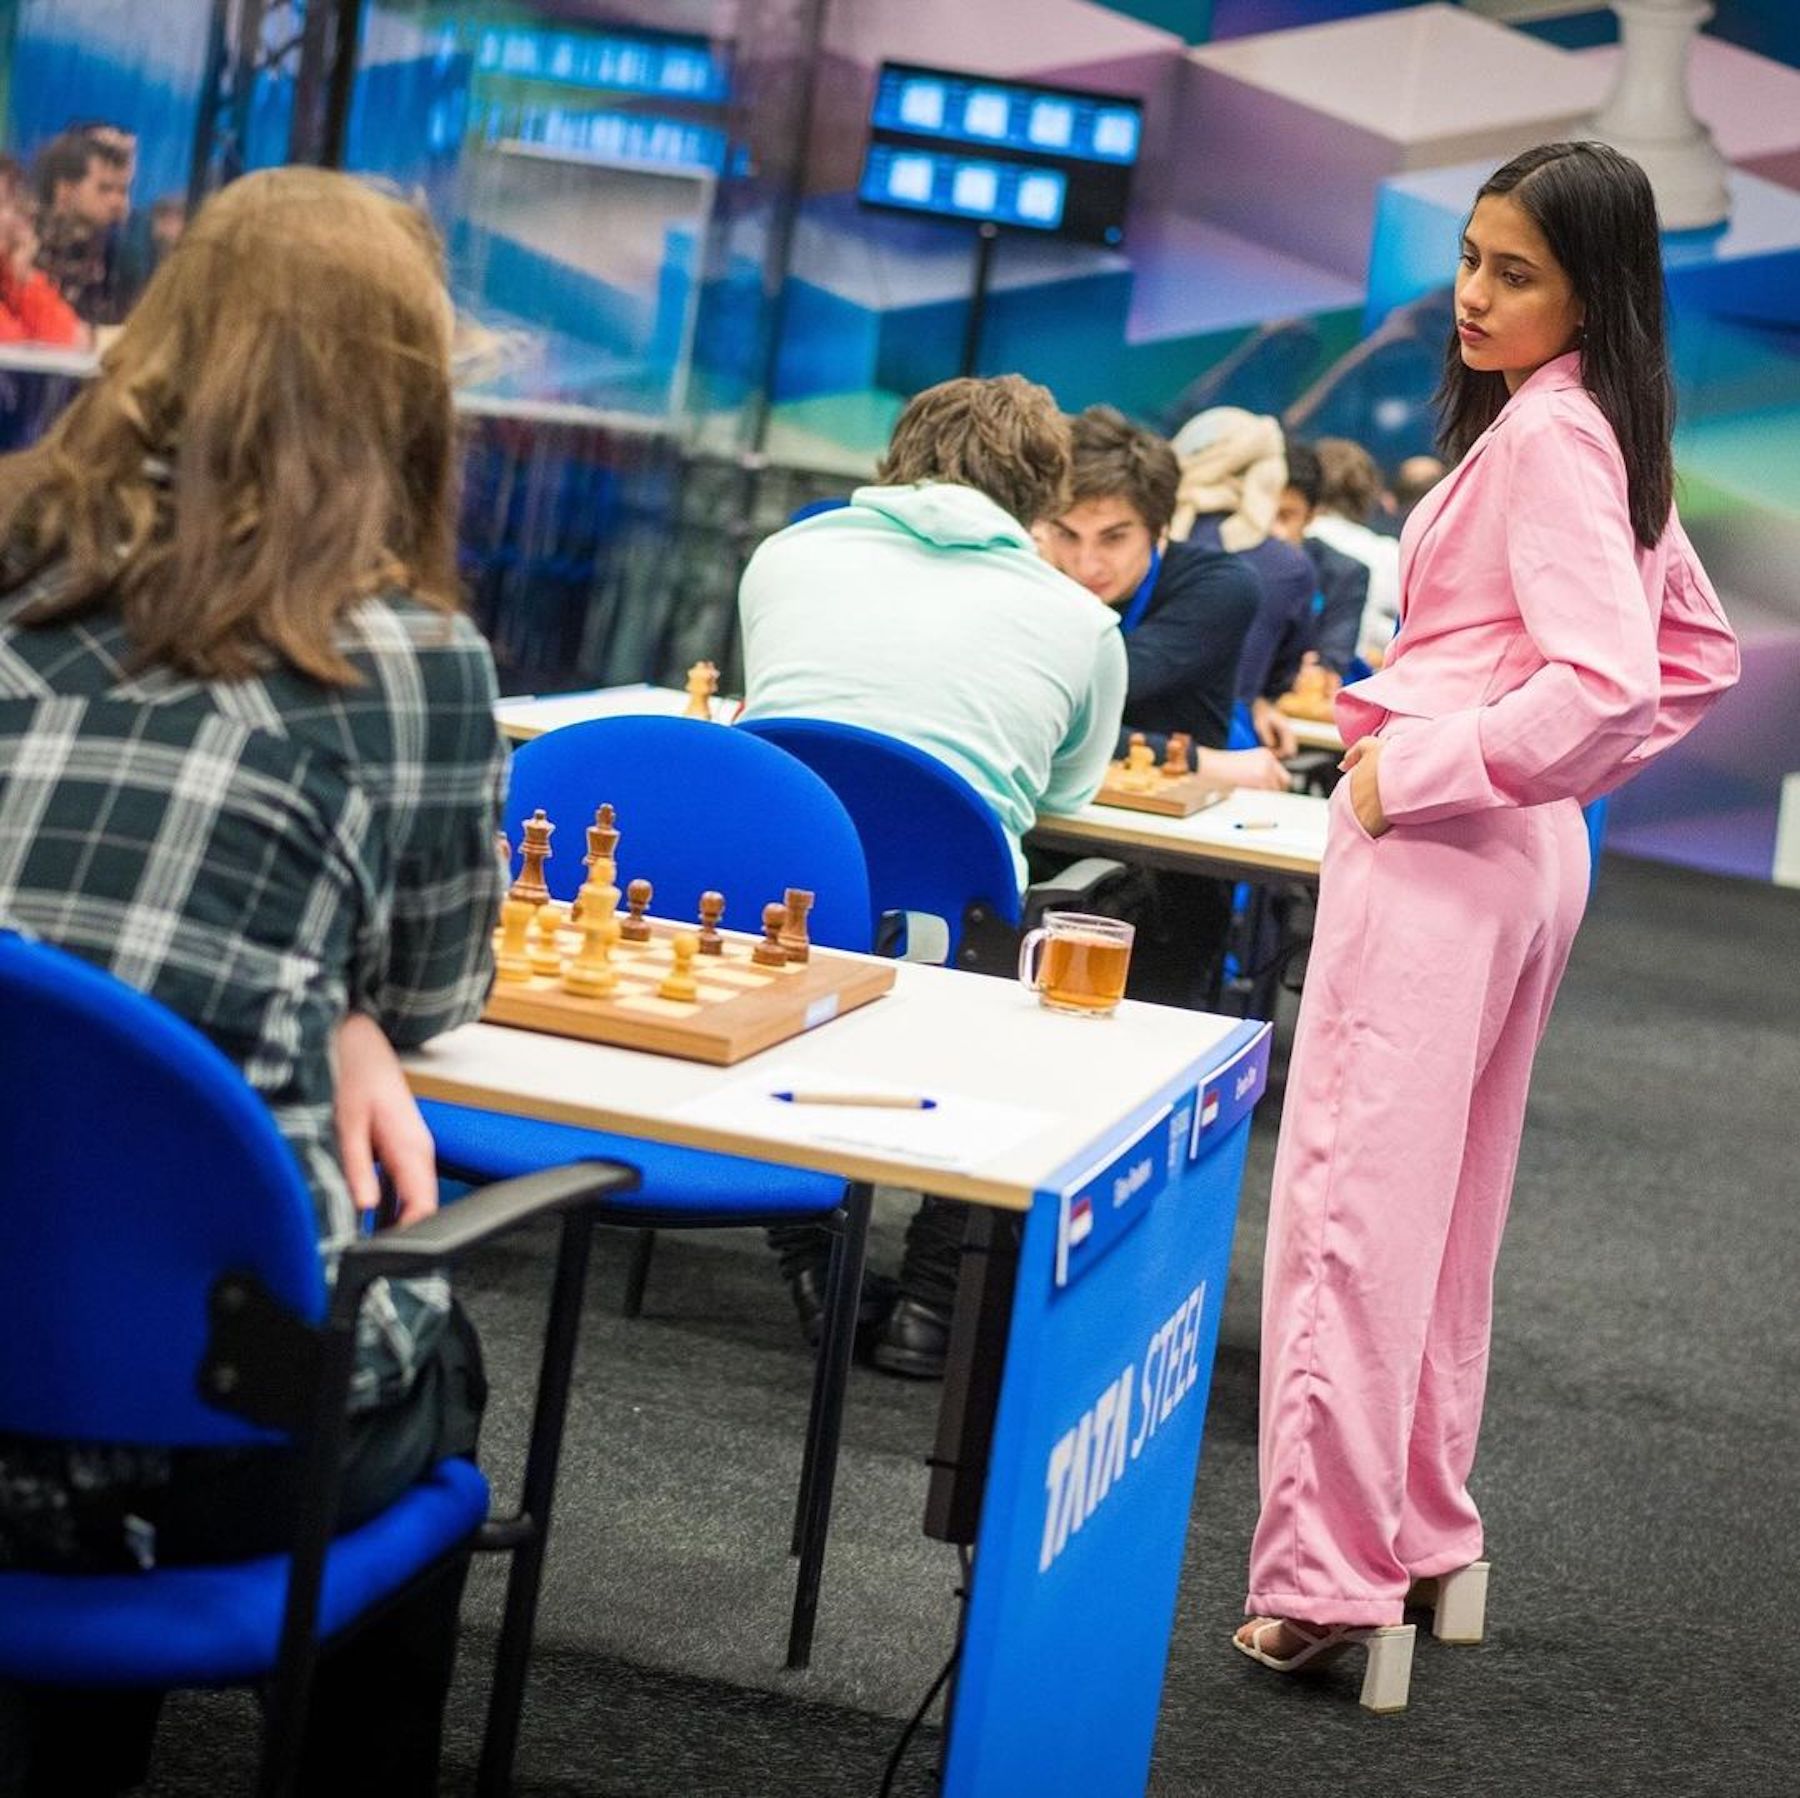 Divya Deshmukh calls out sexism in chess